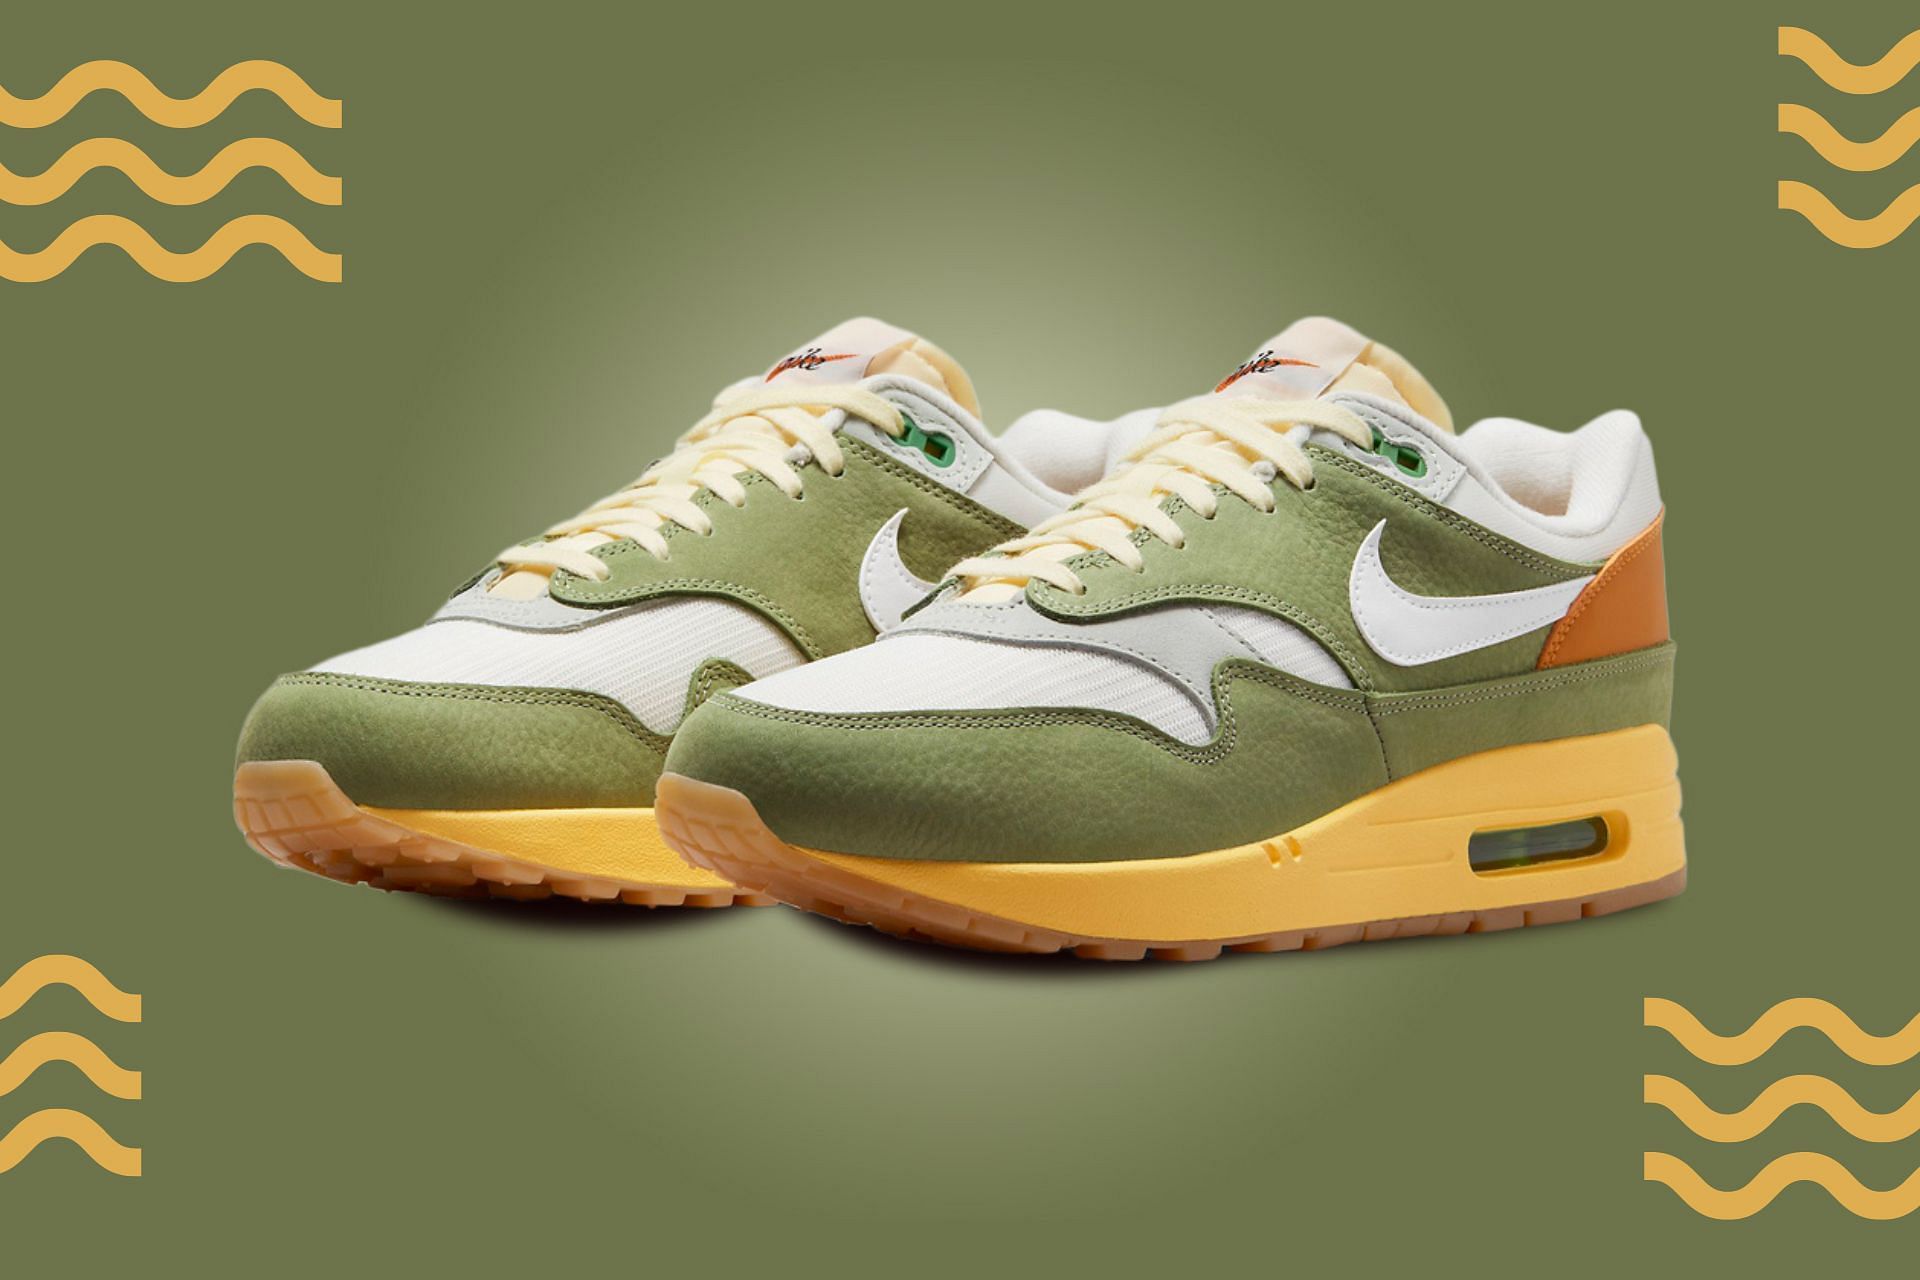 Laptop getrouwd oppervlakte Nike Air Max 1 "Design by Japan" sneakers: Where to buy and more explored